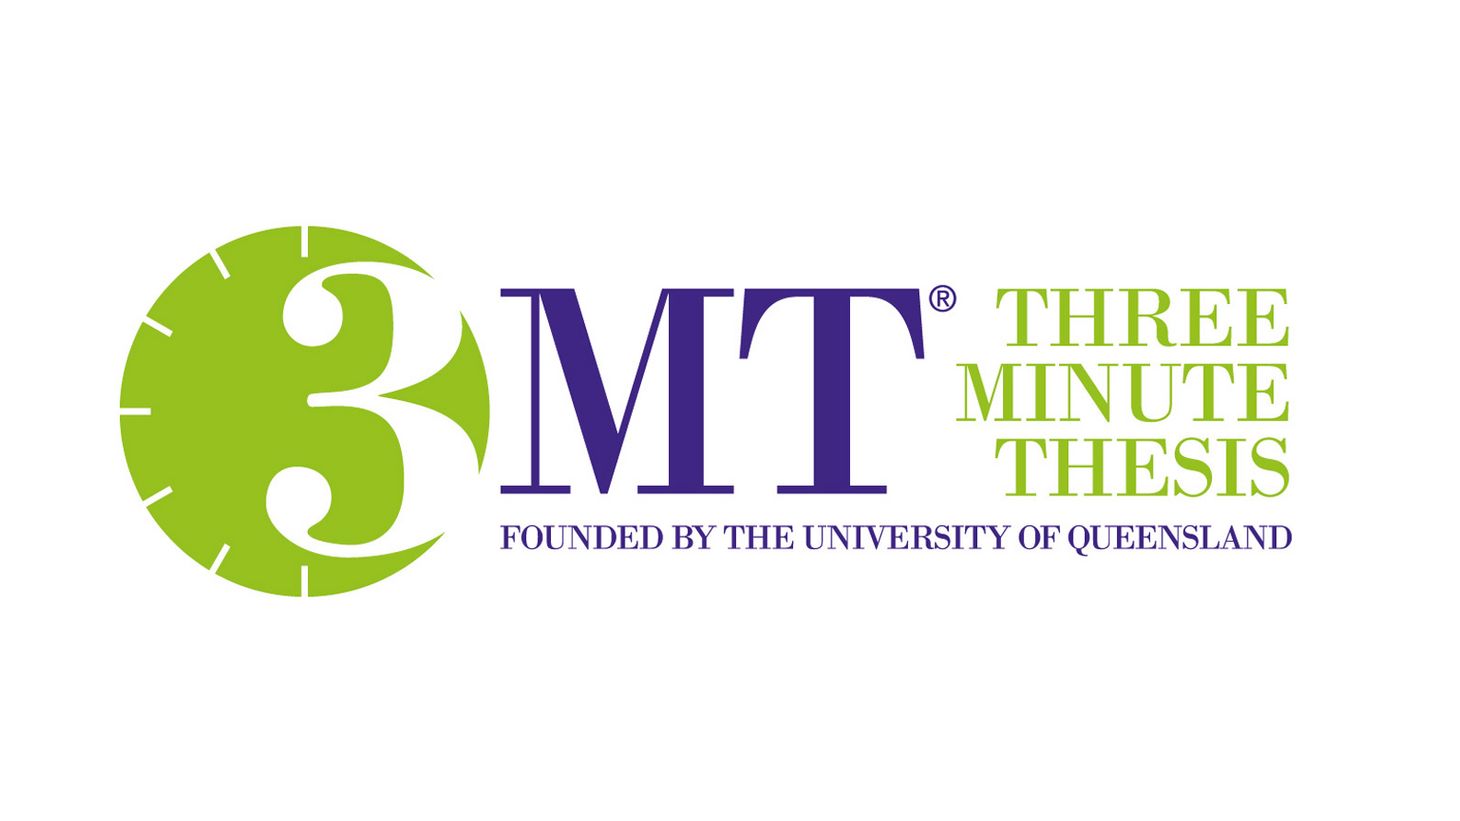 Three Minute Thesis founded by the University of Queensland